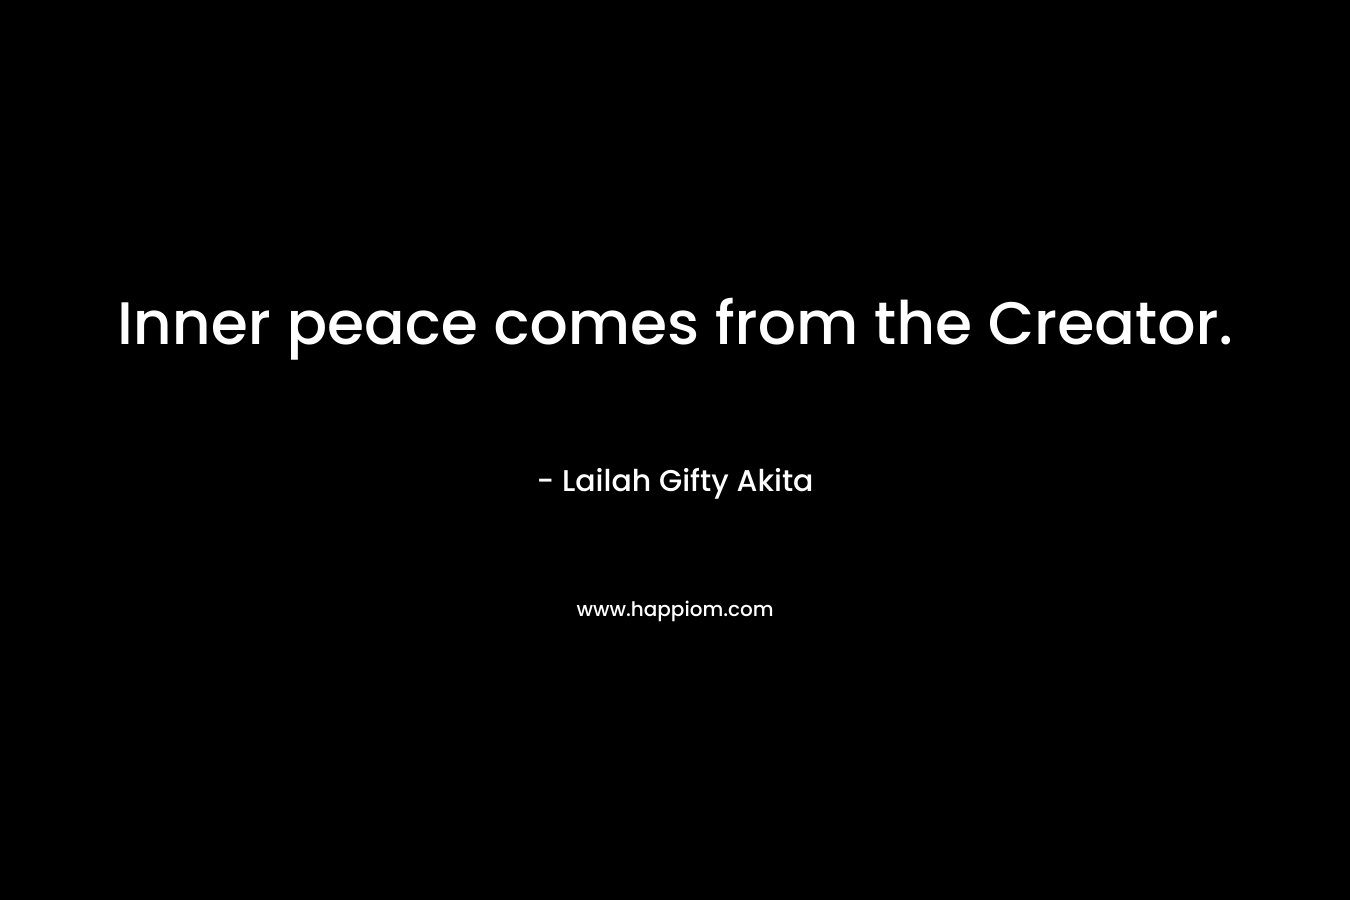 Inner peace comes from the Creator.